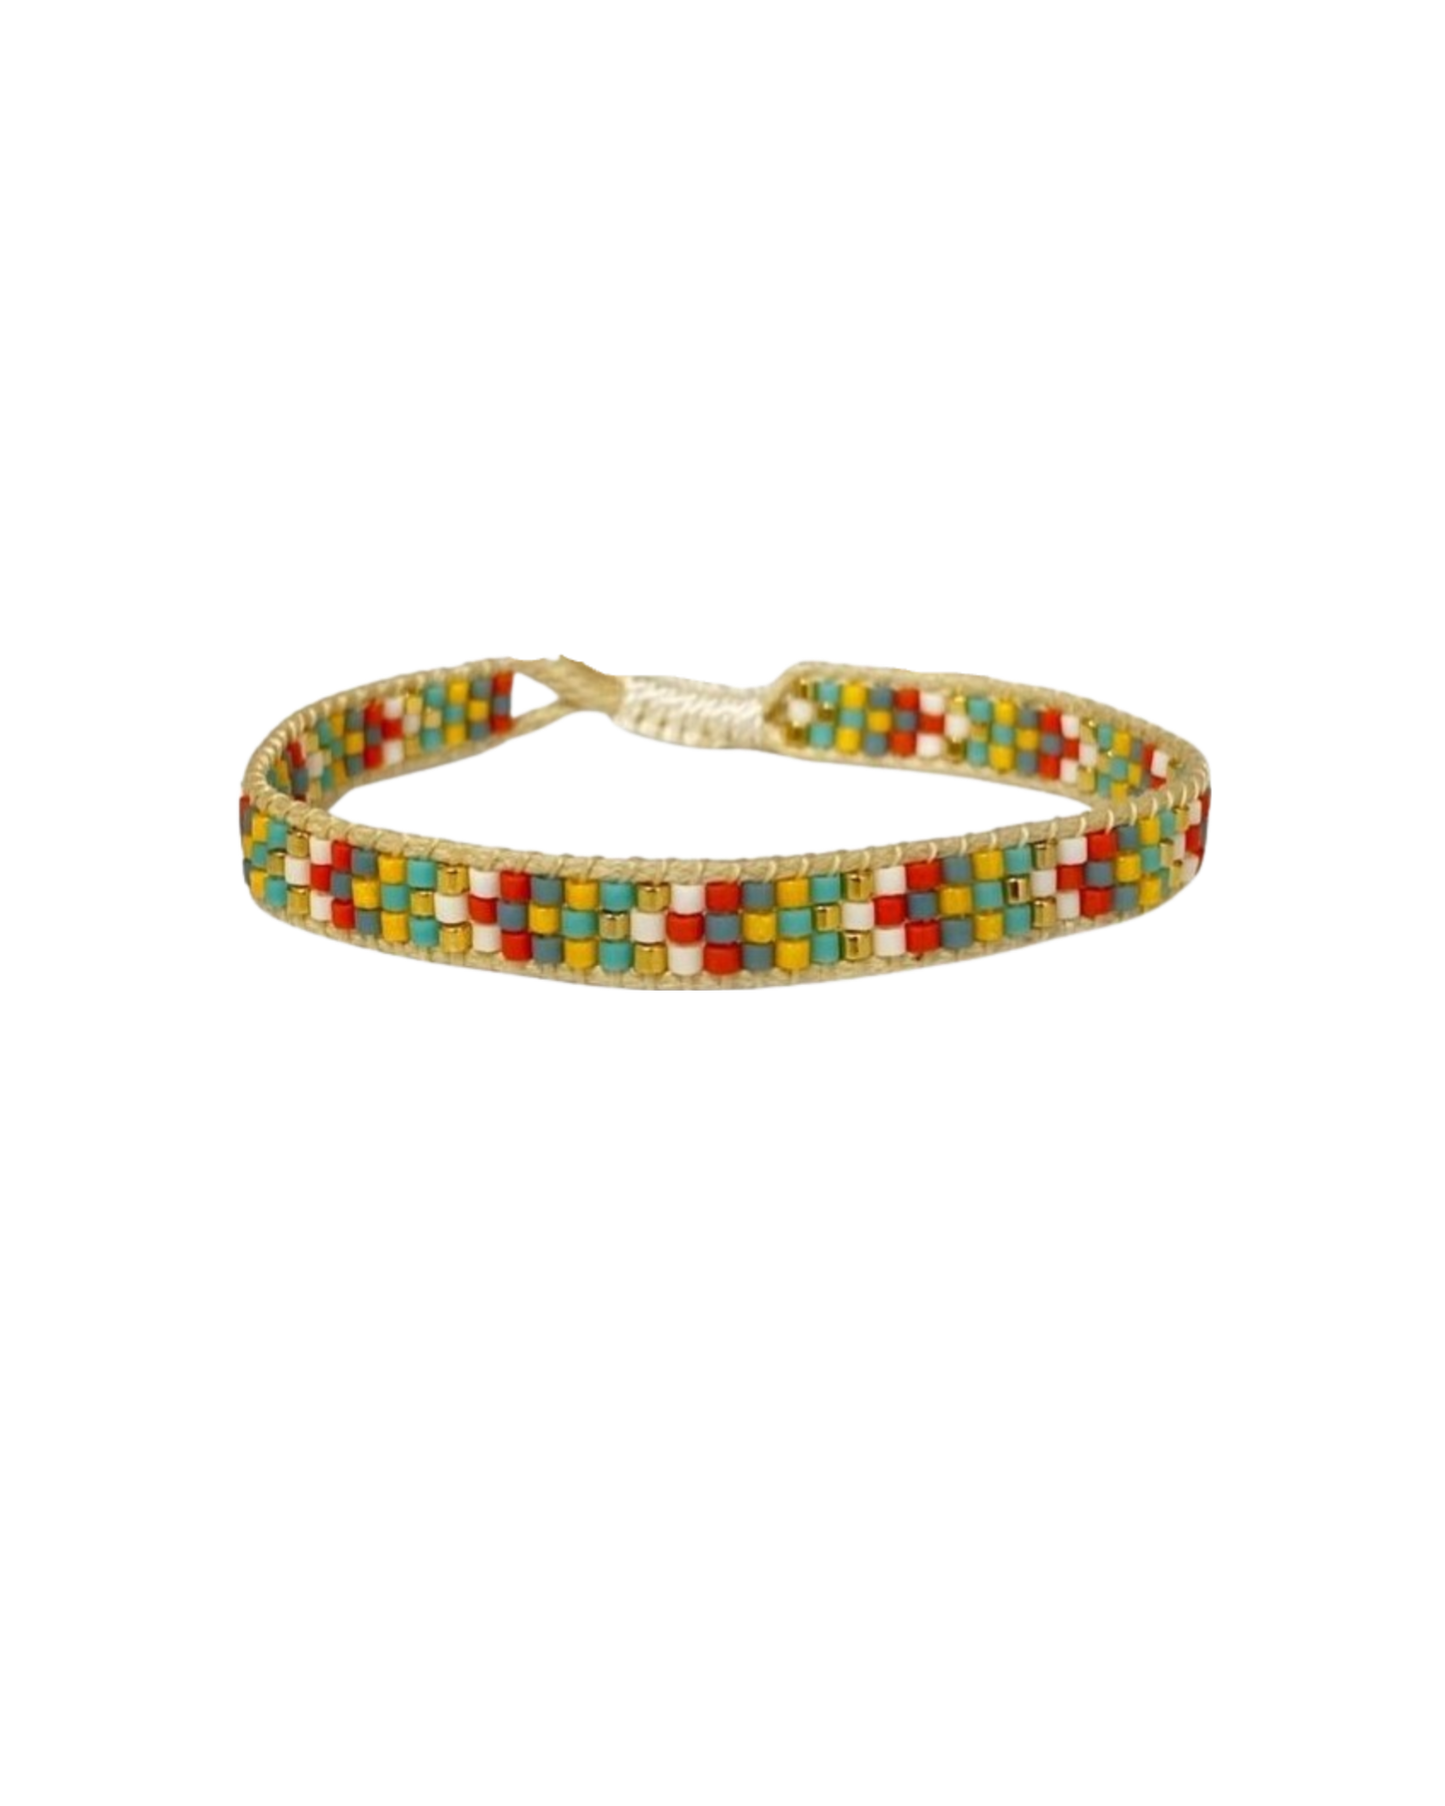 Colorful beaded mexican bracelets